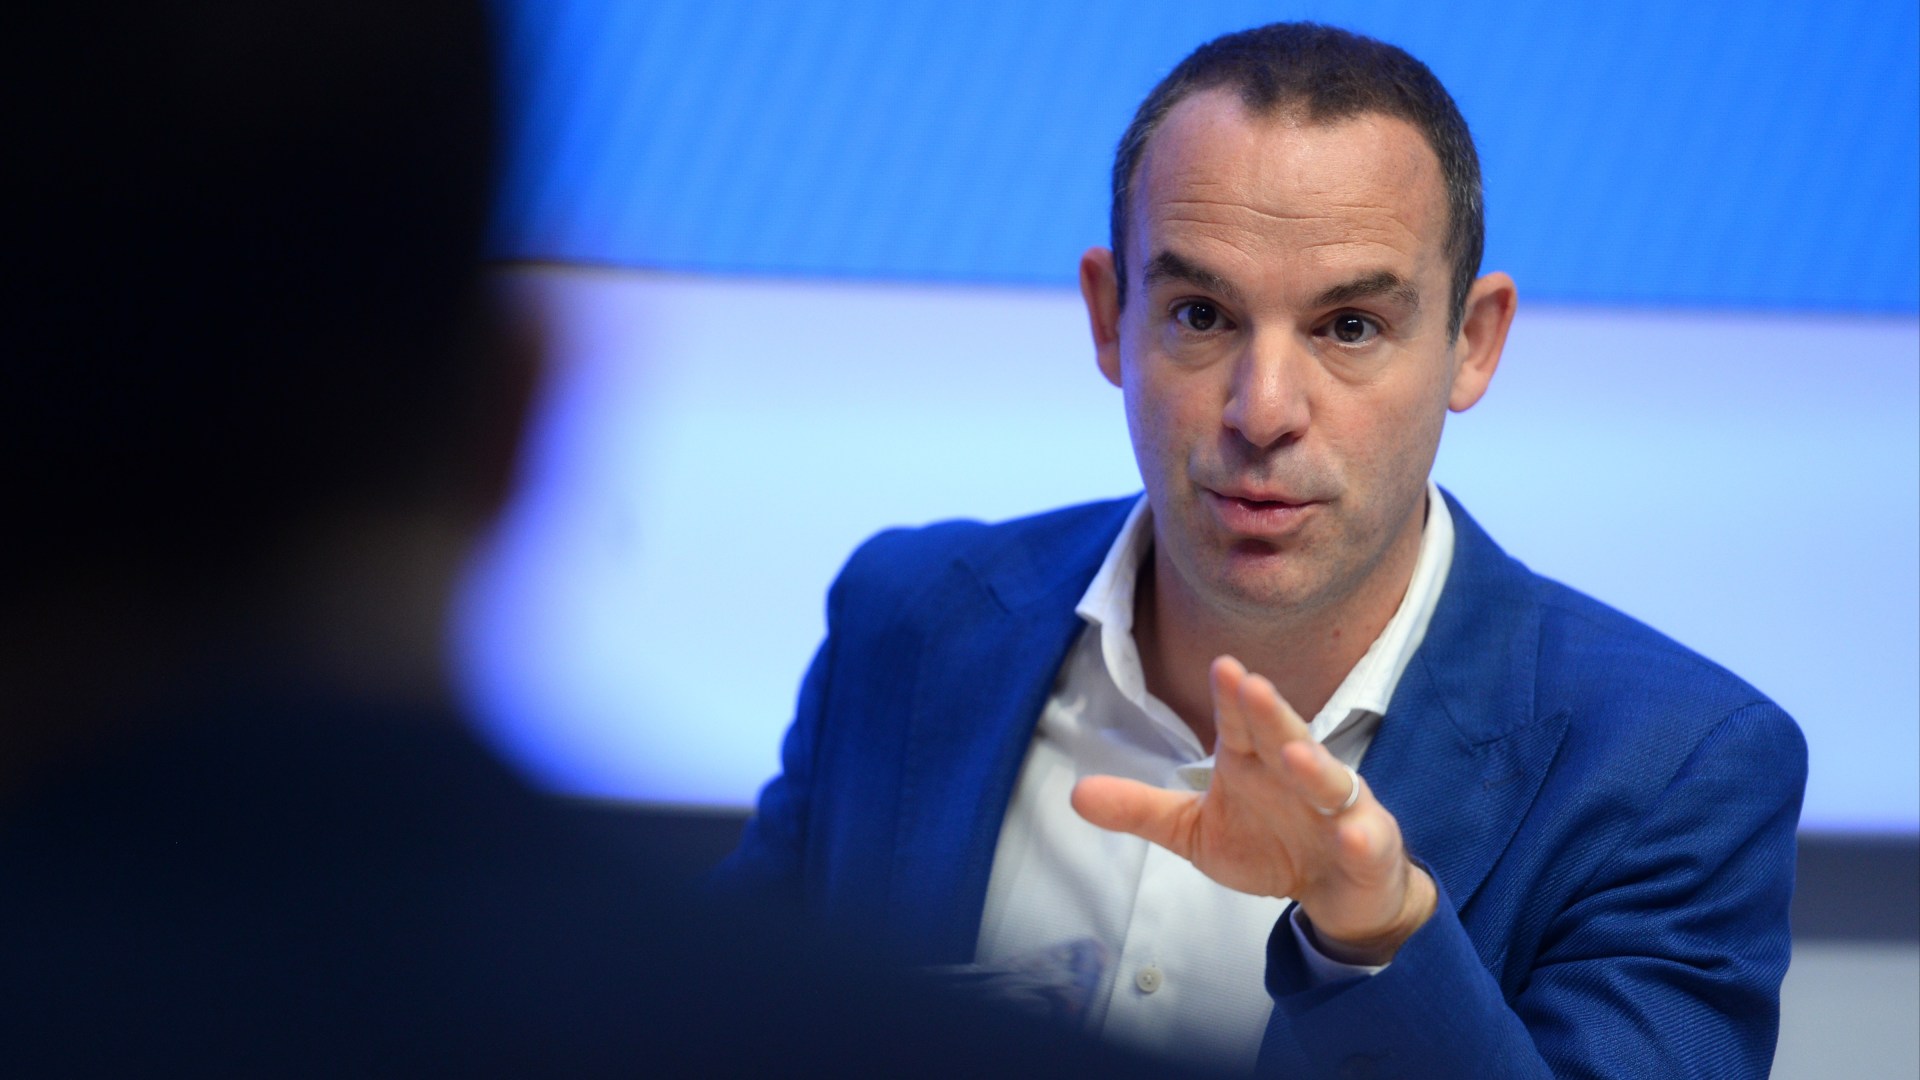 ‘People are tearing their hair out!’ warns Martin Lewis as grieving families hit with death tax delay [Video]